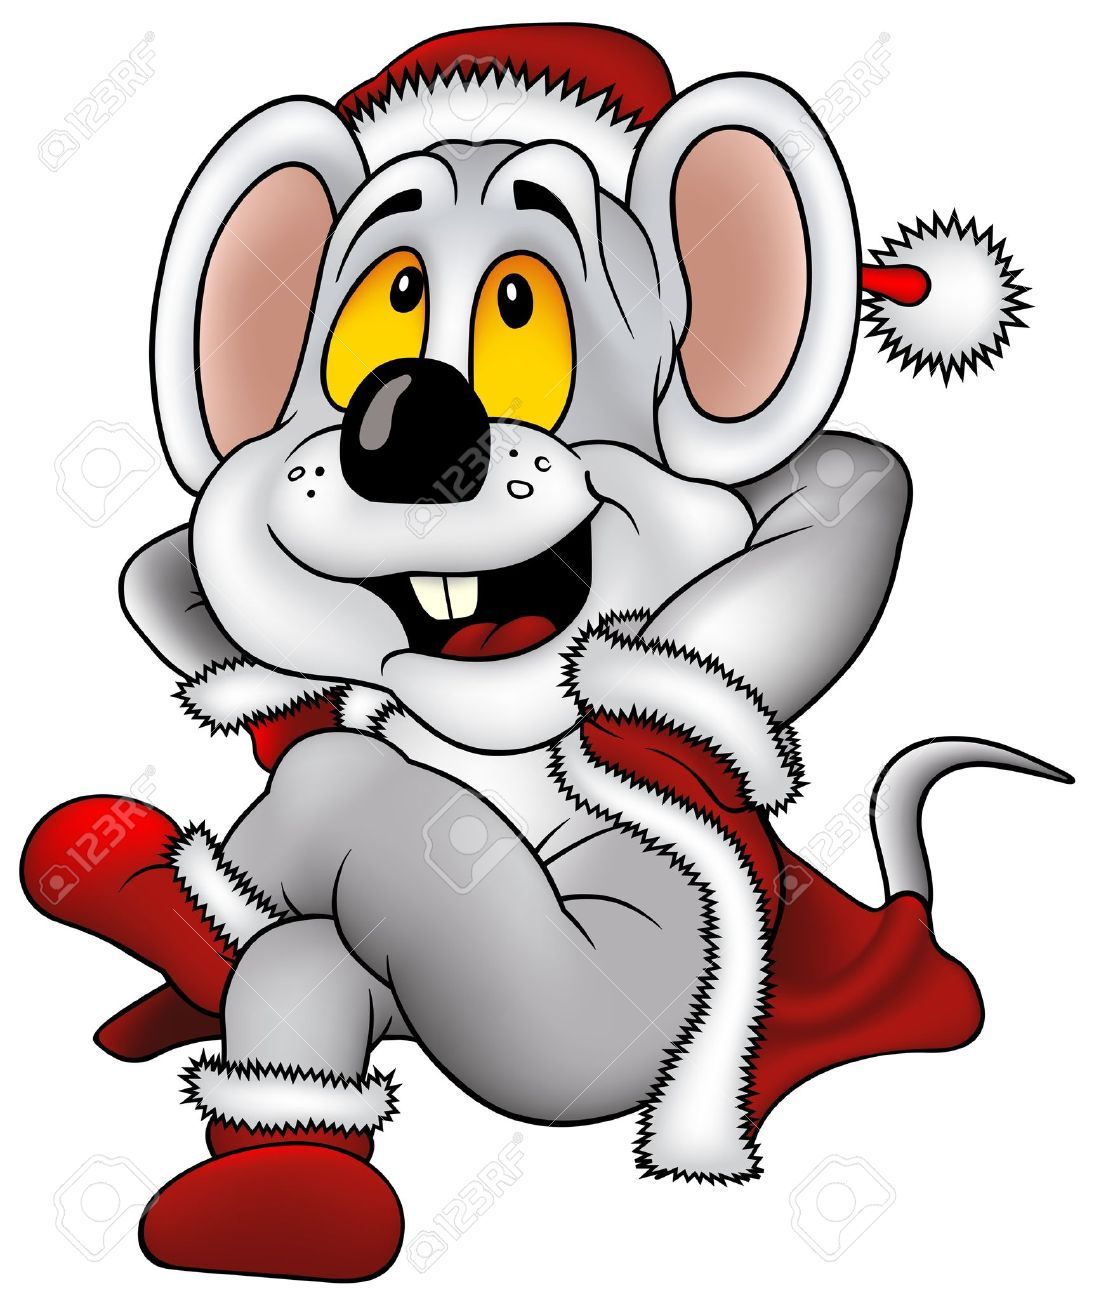 Christmas mouse clipart free 6 » Clipart Portal.